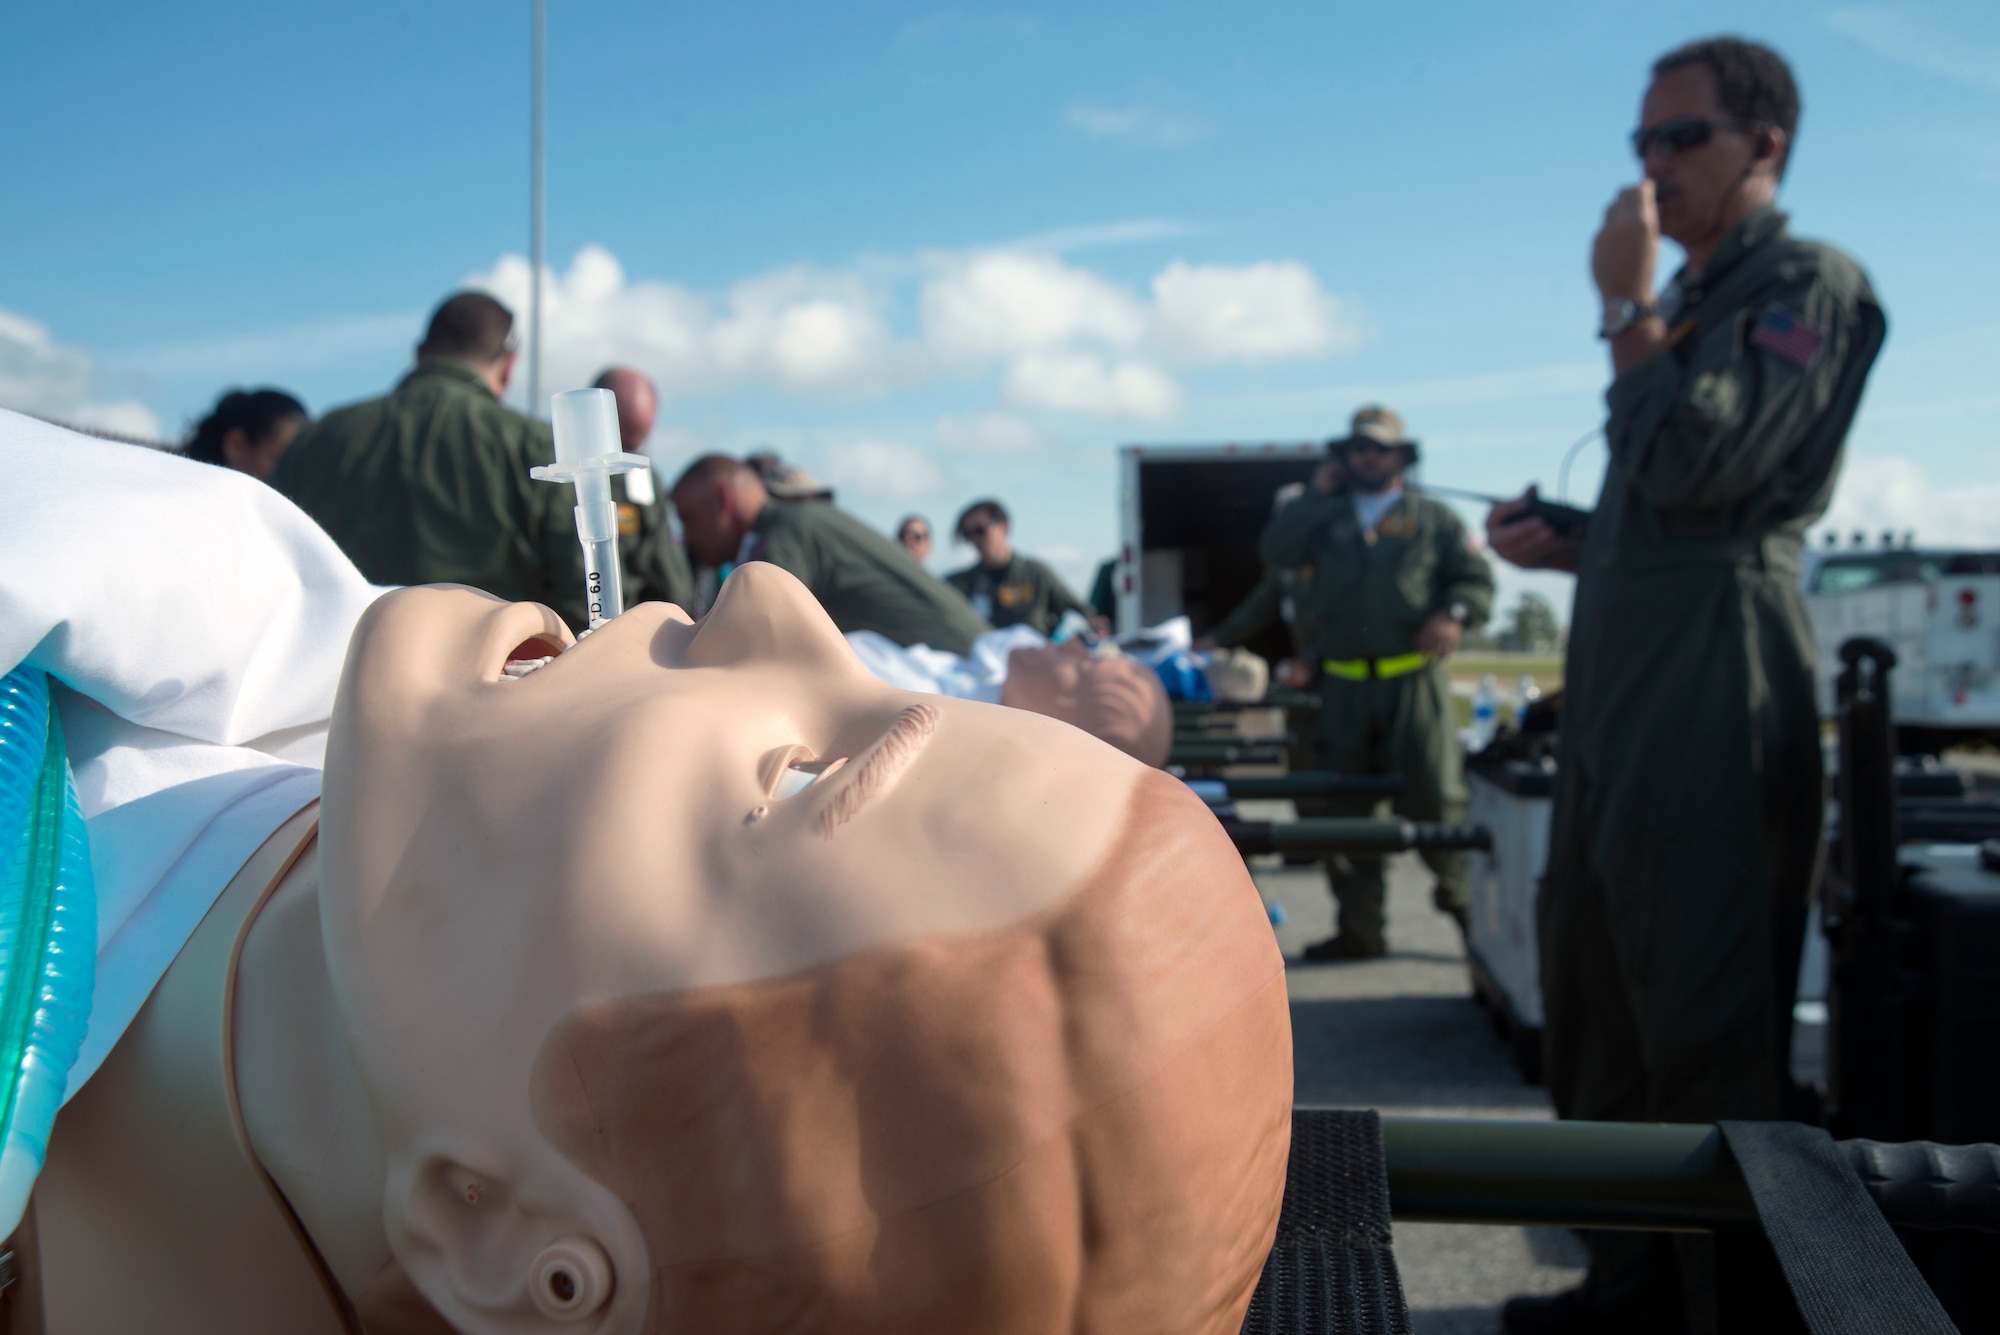 The Florida Advanced Surgical and Transportation (FAST) team simulates first aid care to patients at MacDill Air Force Base, Fla., Feb. 28, 2018.